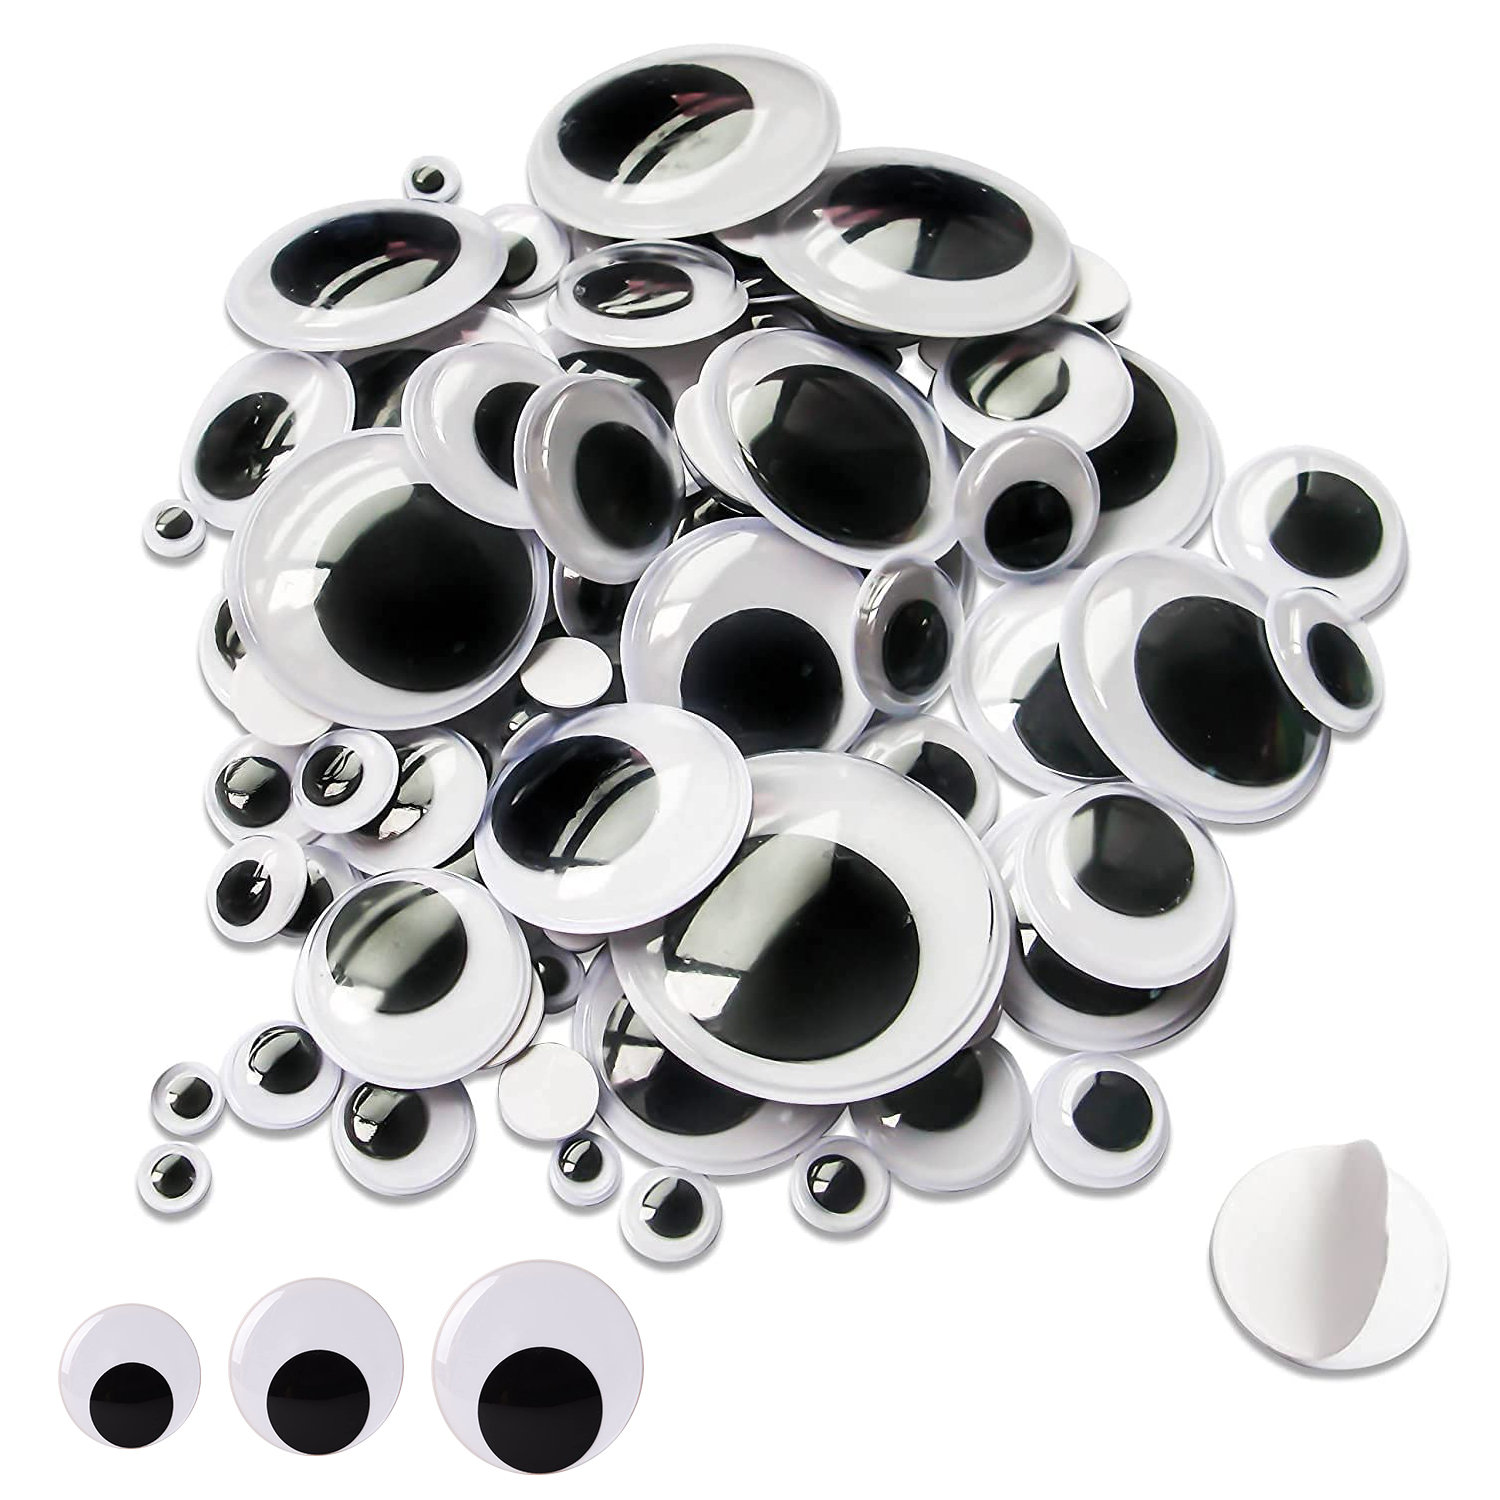 240Pcs 0.4 Inch Small Googly Eyes with Self Adhesive Small Black White Plastic Googly Wiggle Eyes for School DIY Crafts Scrapbooking Decoration 